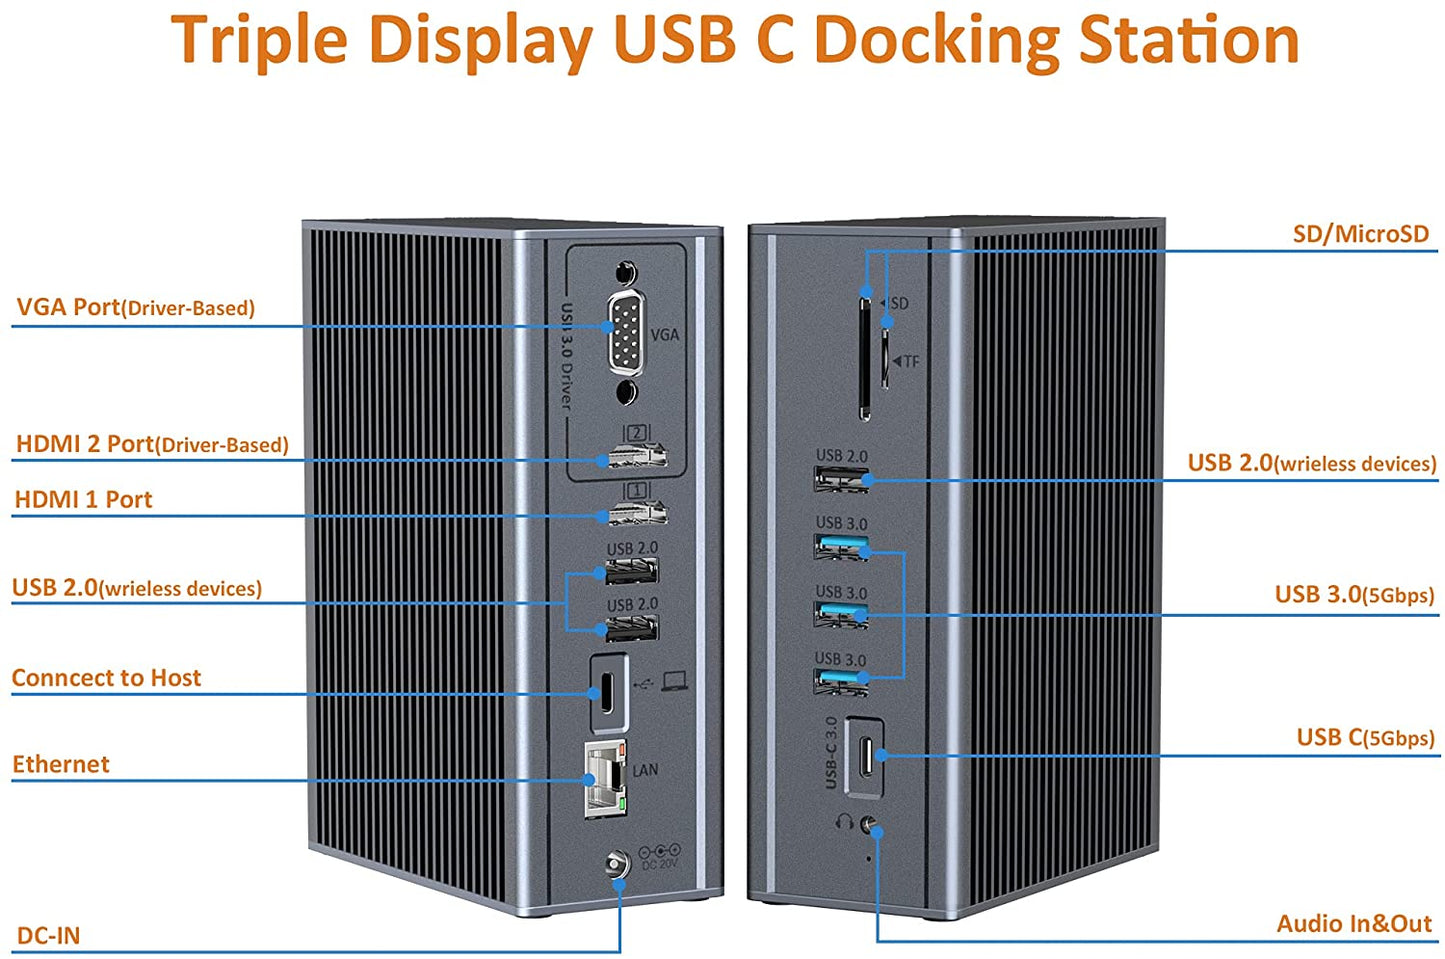 Triple Display USB C docking Station Specifications